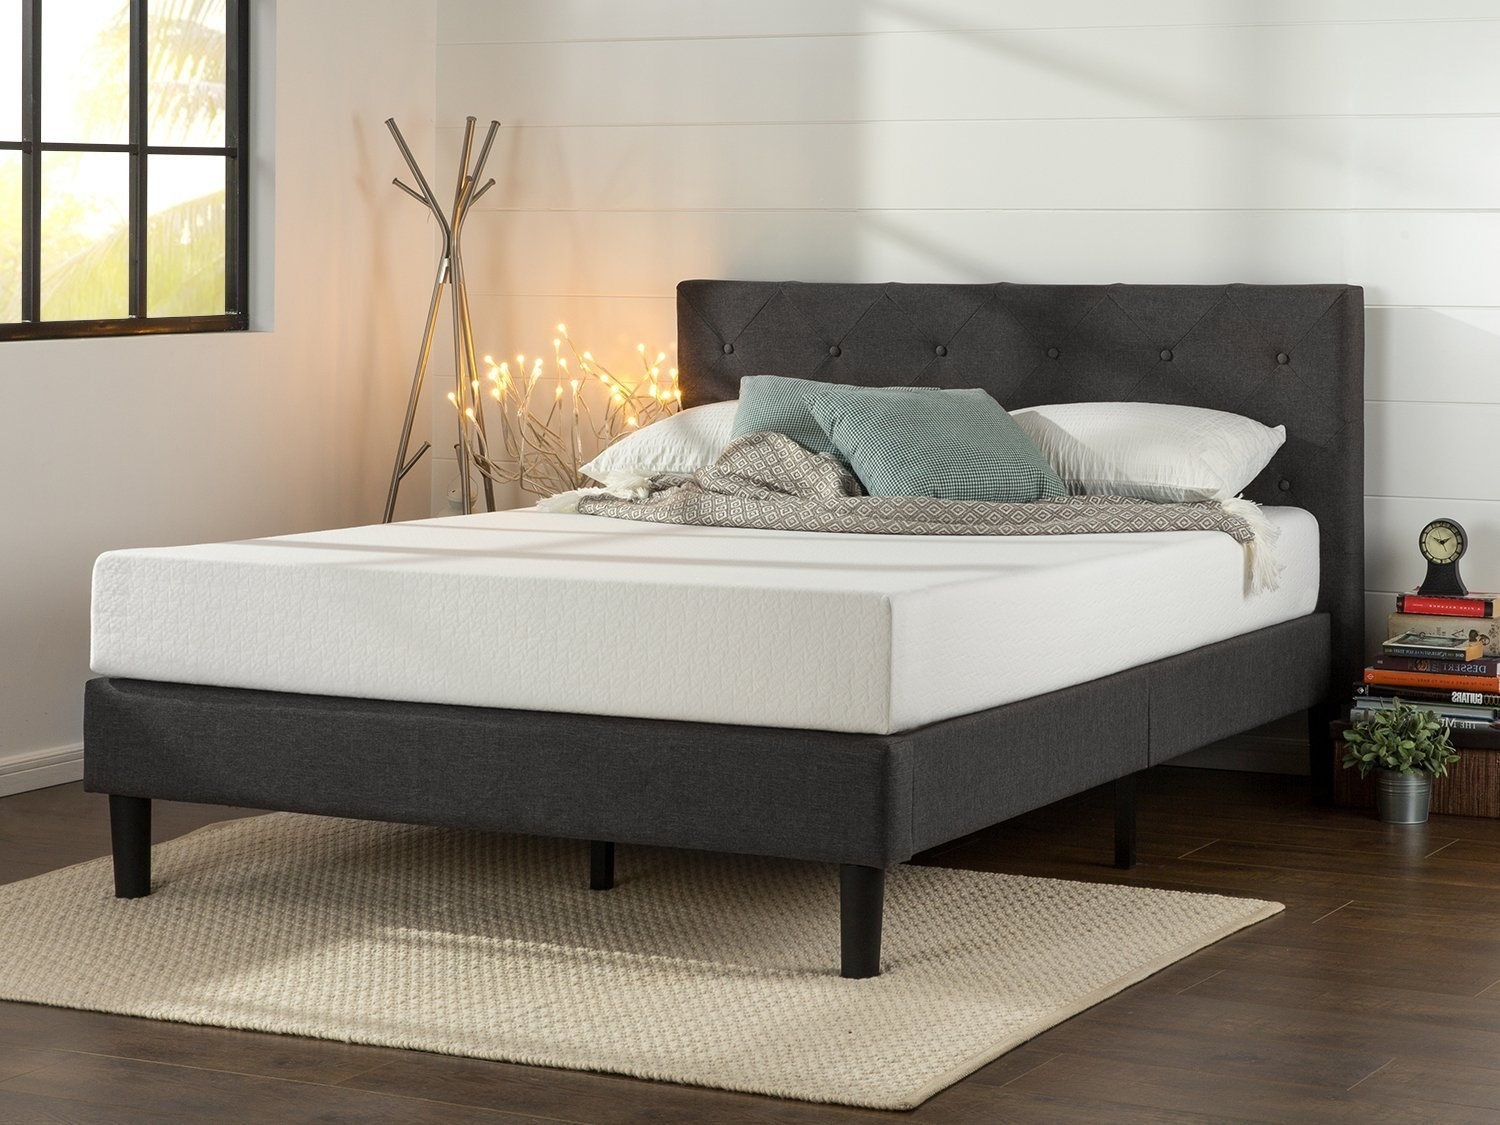 The platform bed with a tufted headboard in dark grey with a mattress on top